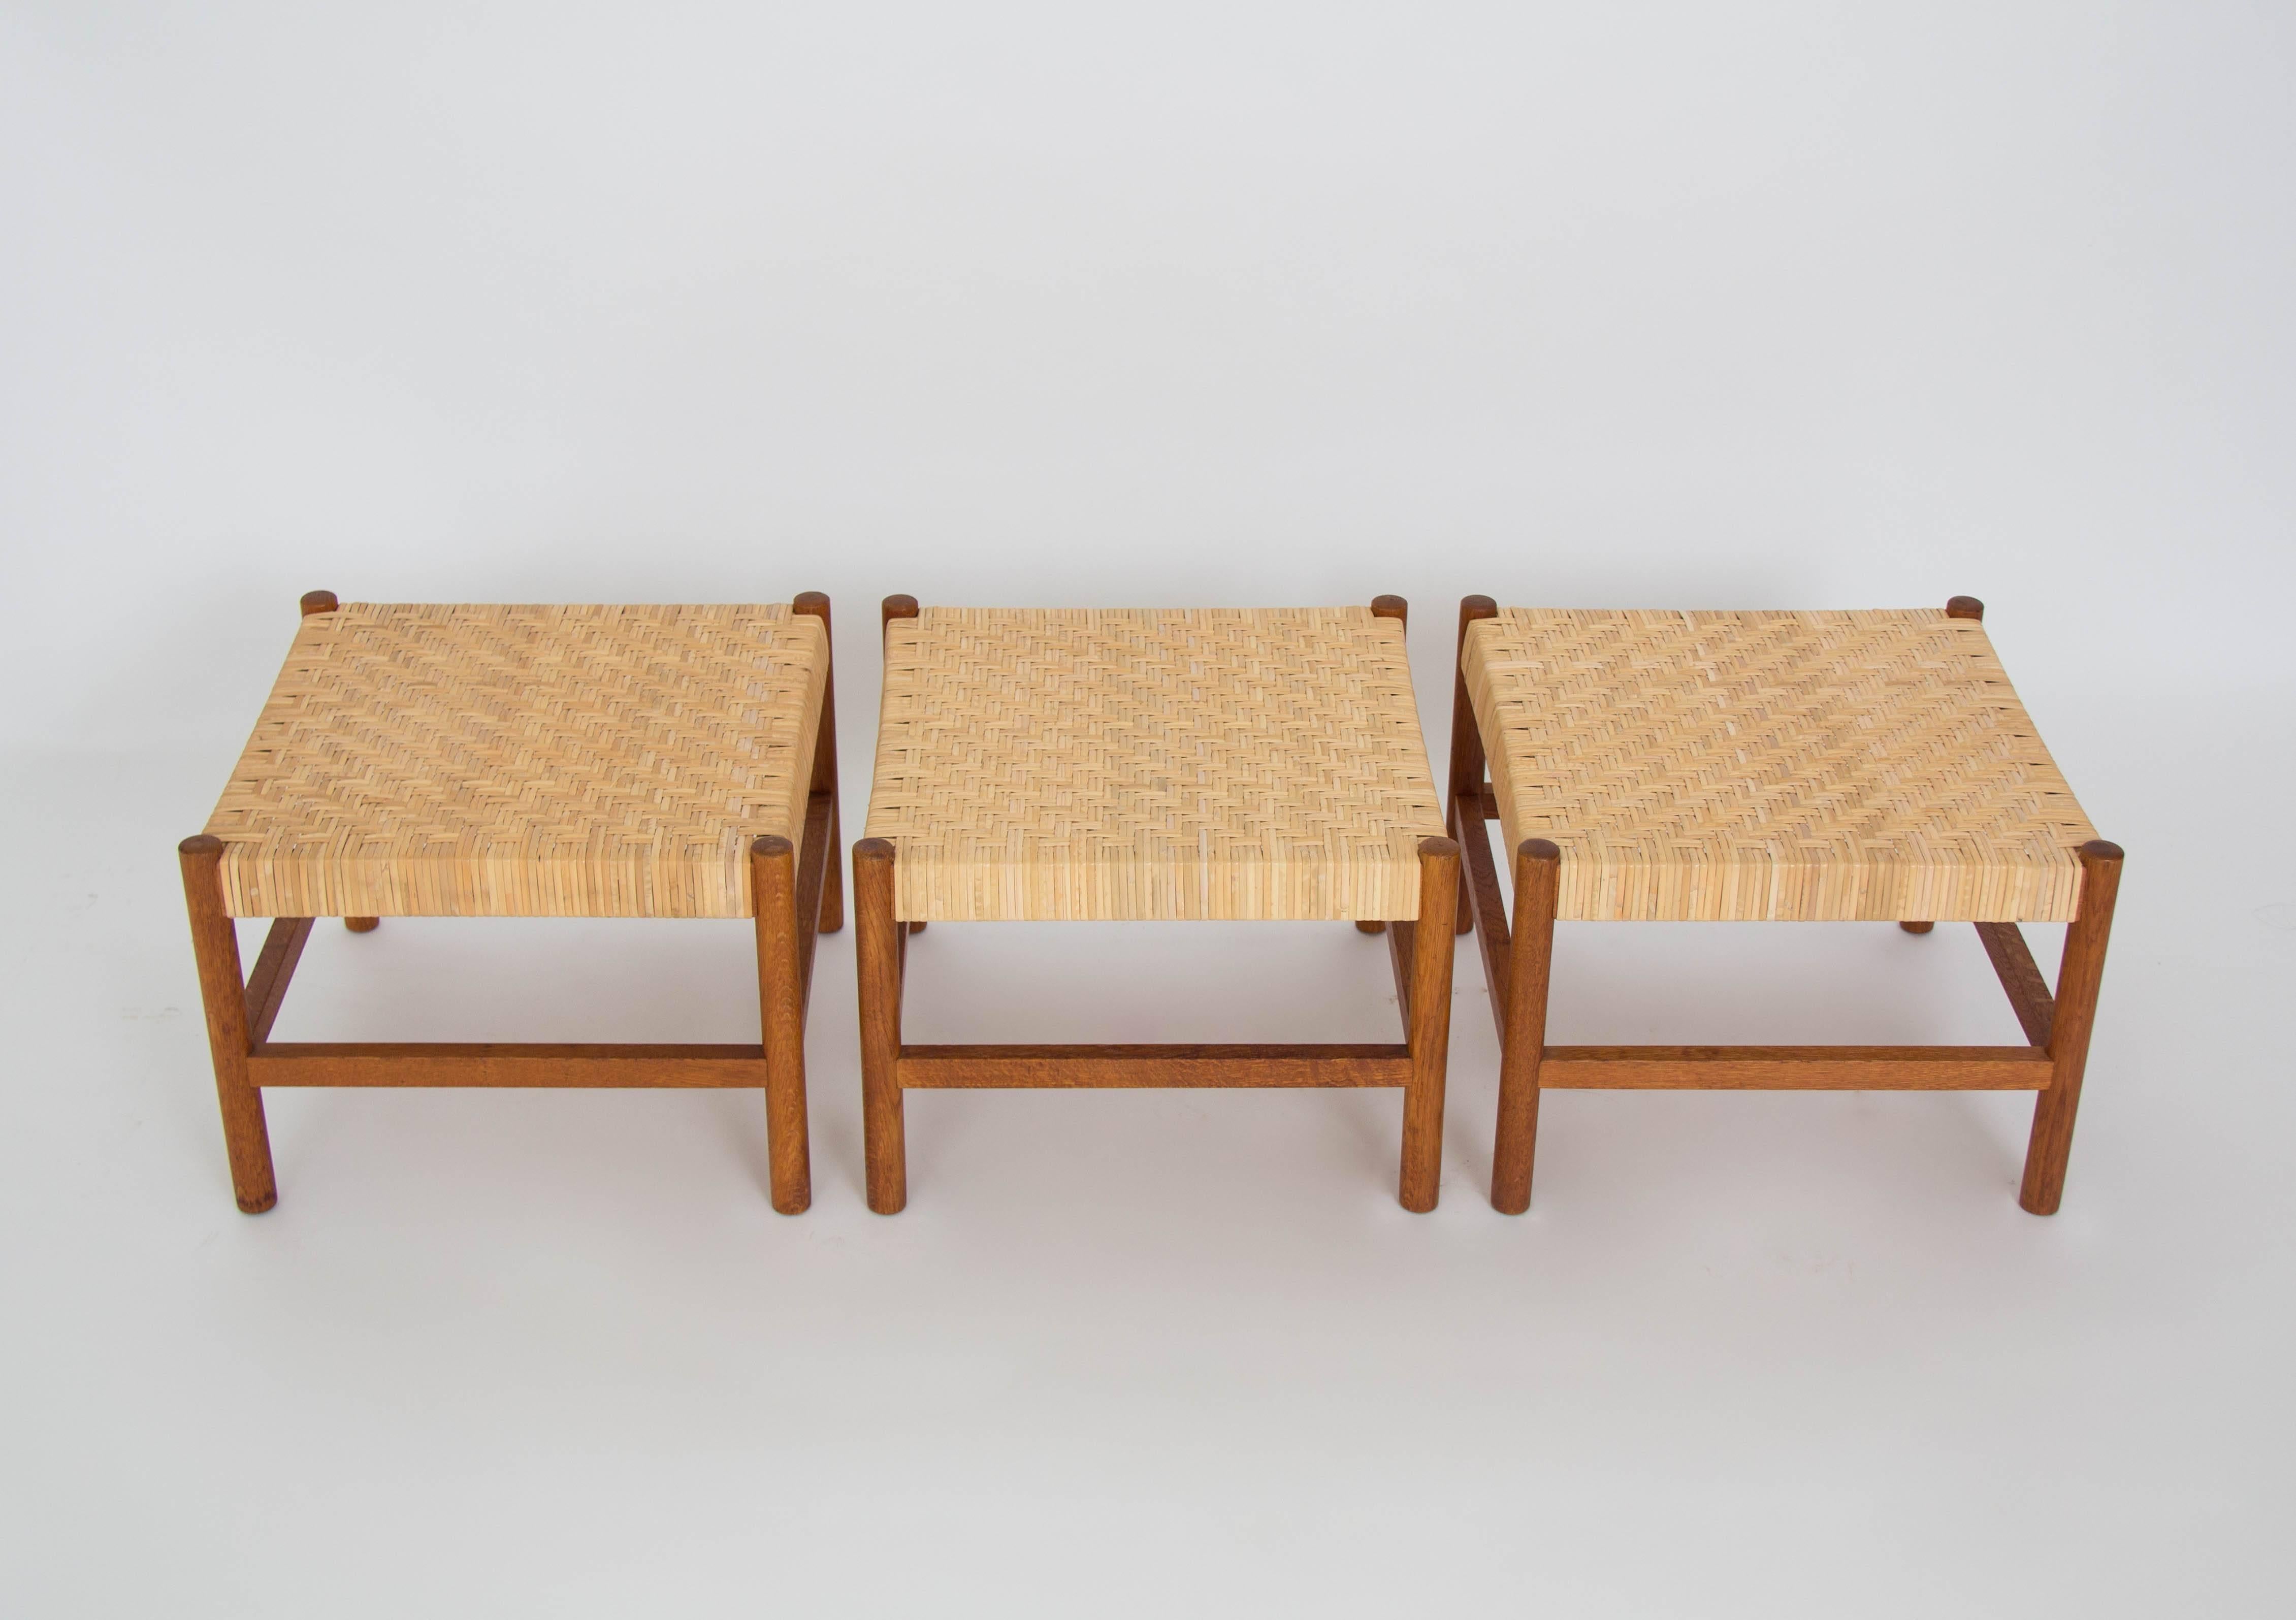 Three low, square stools designed by Axel Thygesen and produced by Interna of Denmark. The frame is constructed of a patinated oakwood and the seat is made of woven cane. The square design is supported by dowel legs of solid oak set at each corner